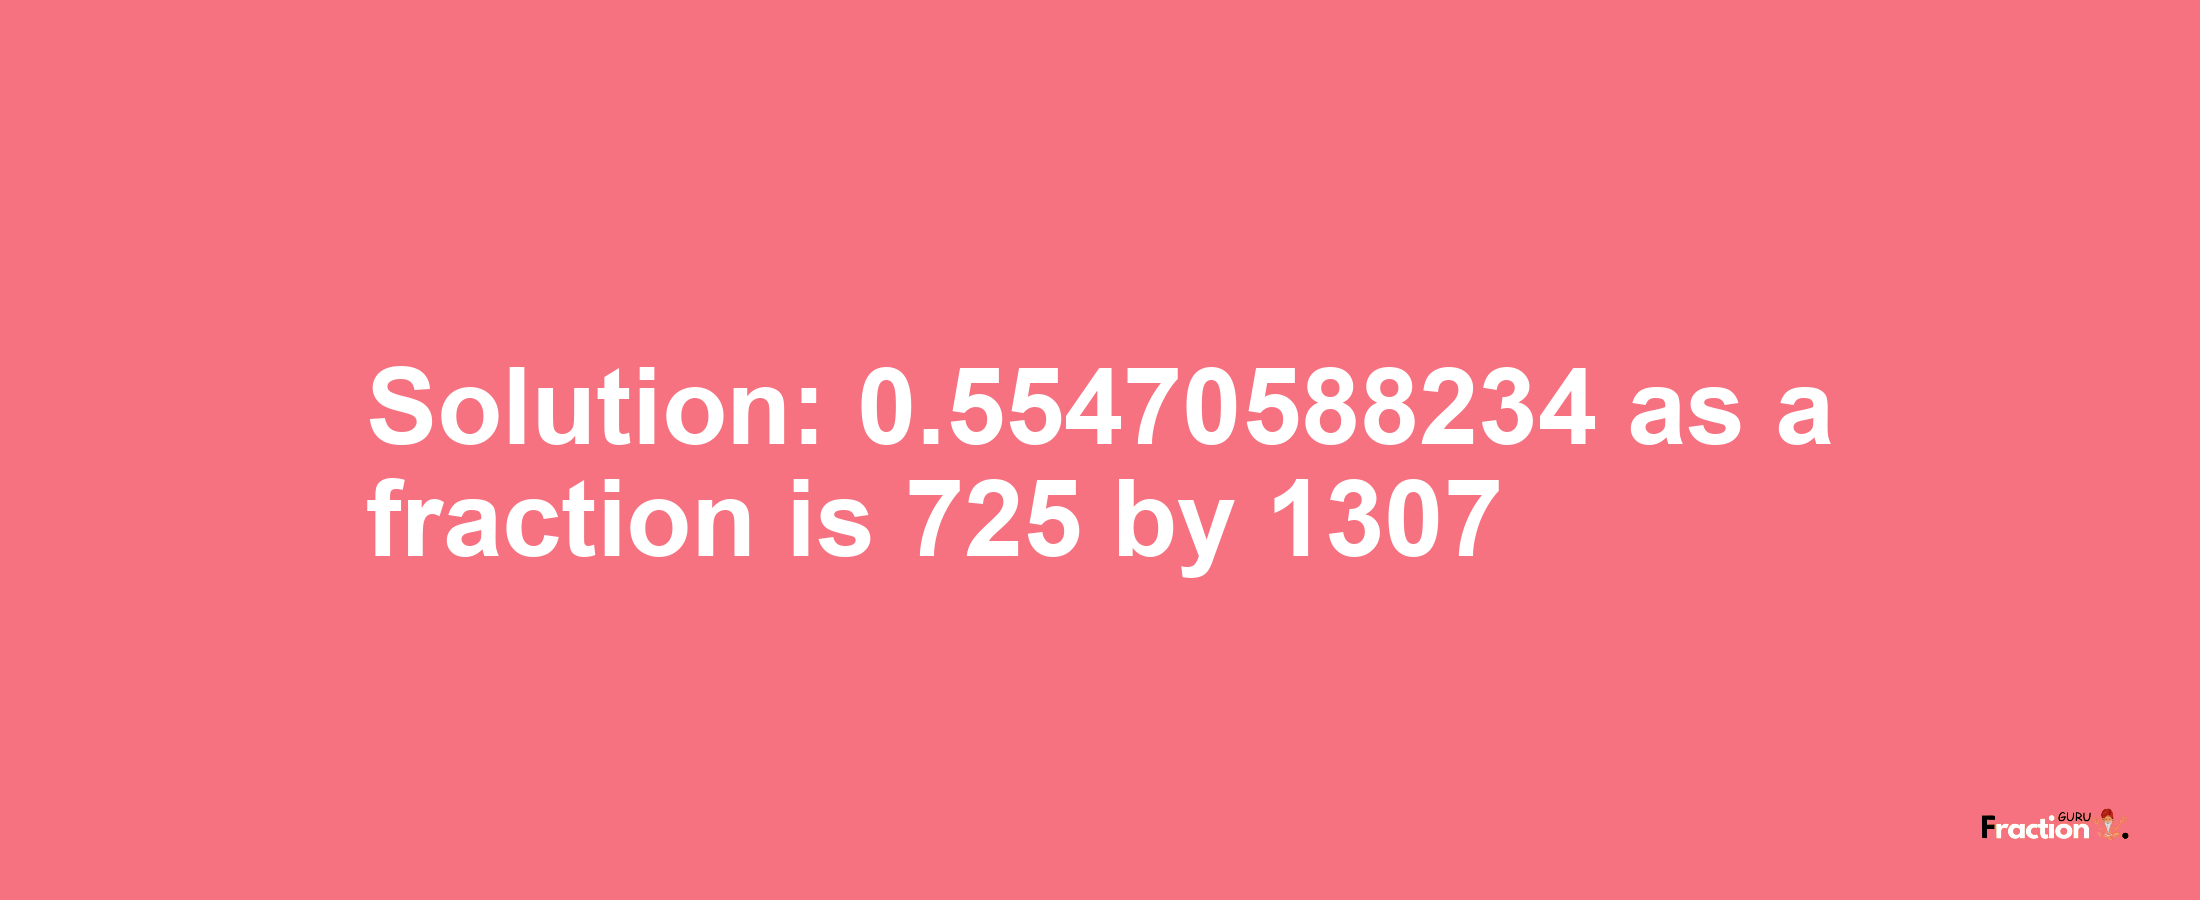 Solution:0.55470588234 as a fraction is 725/1307